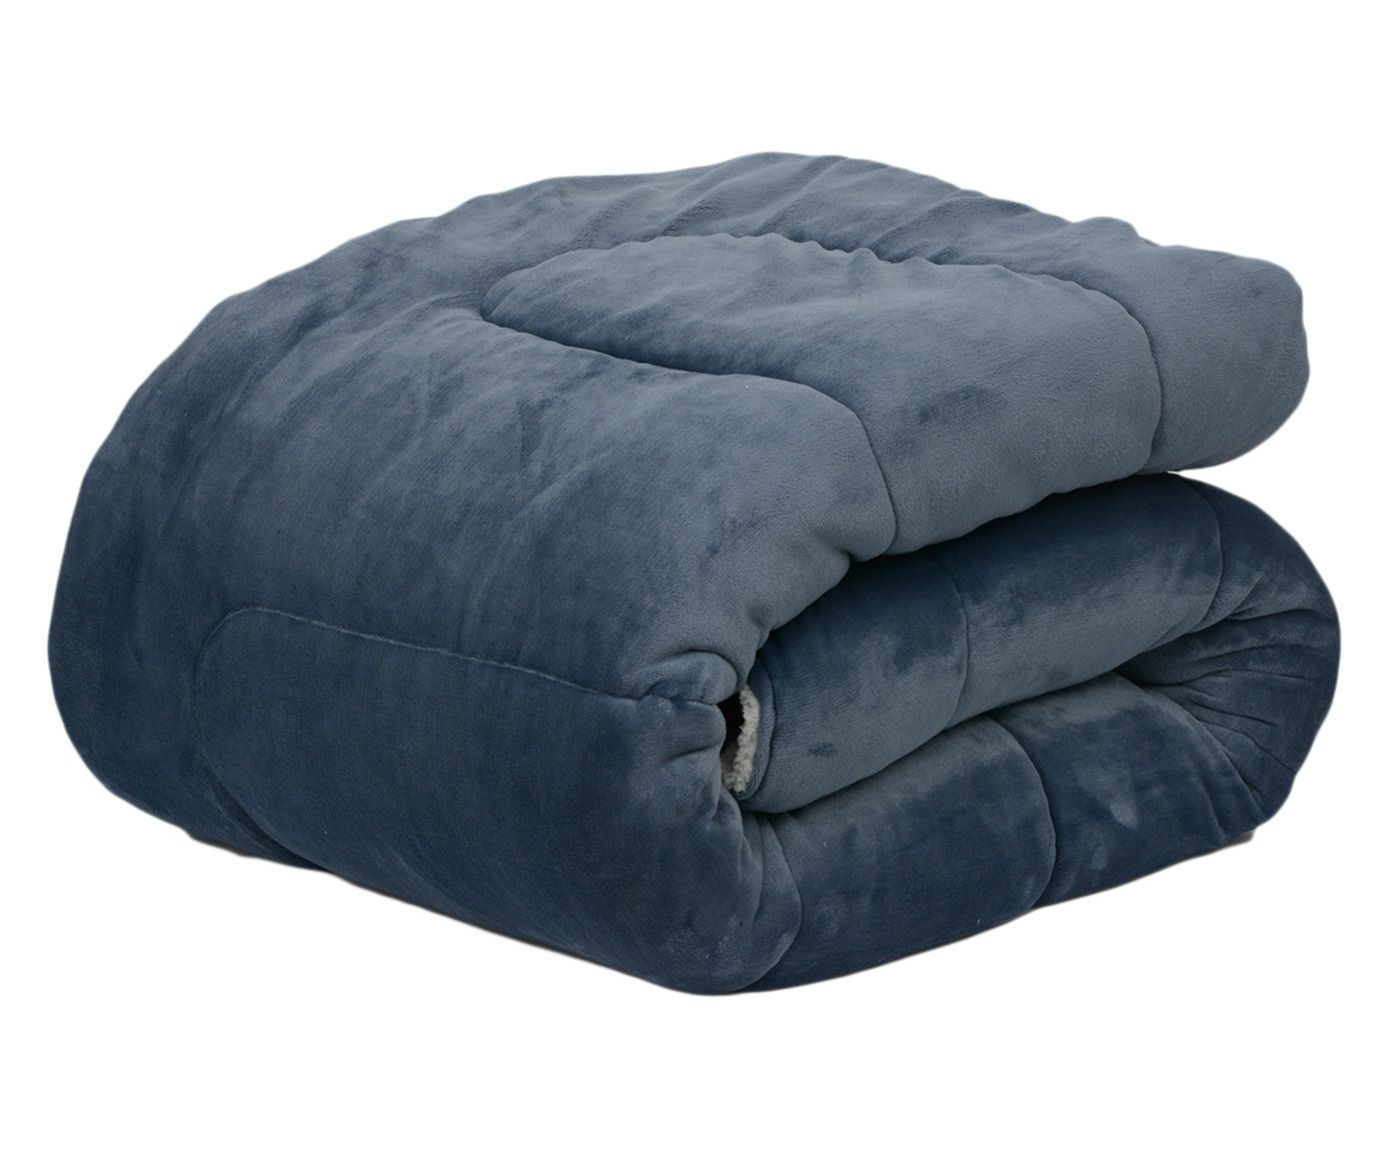 Cobre-Leito Flannel Sherpa Indigo 130G/M² - Queen Size | Westwing.com.br